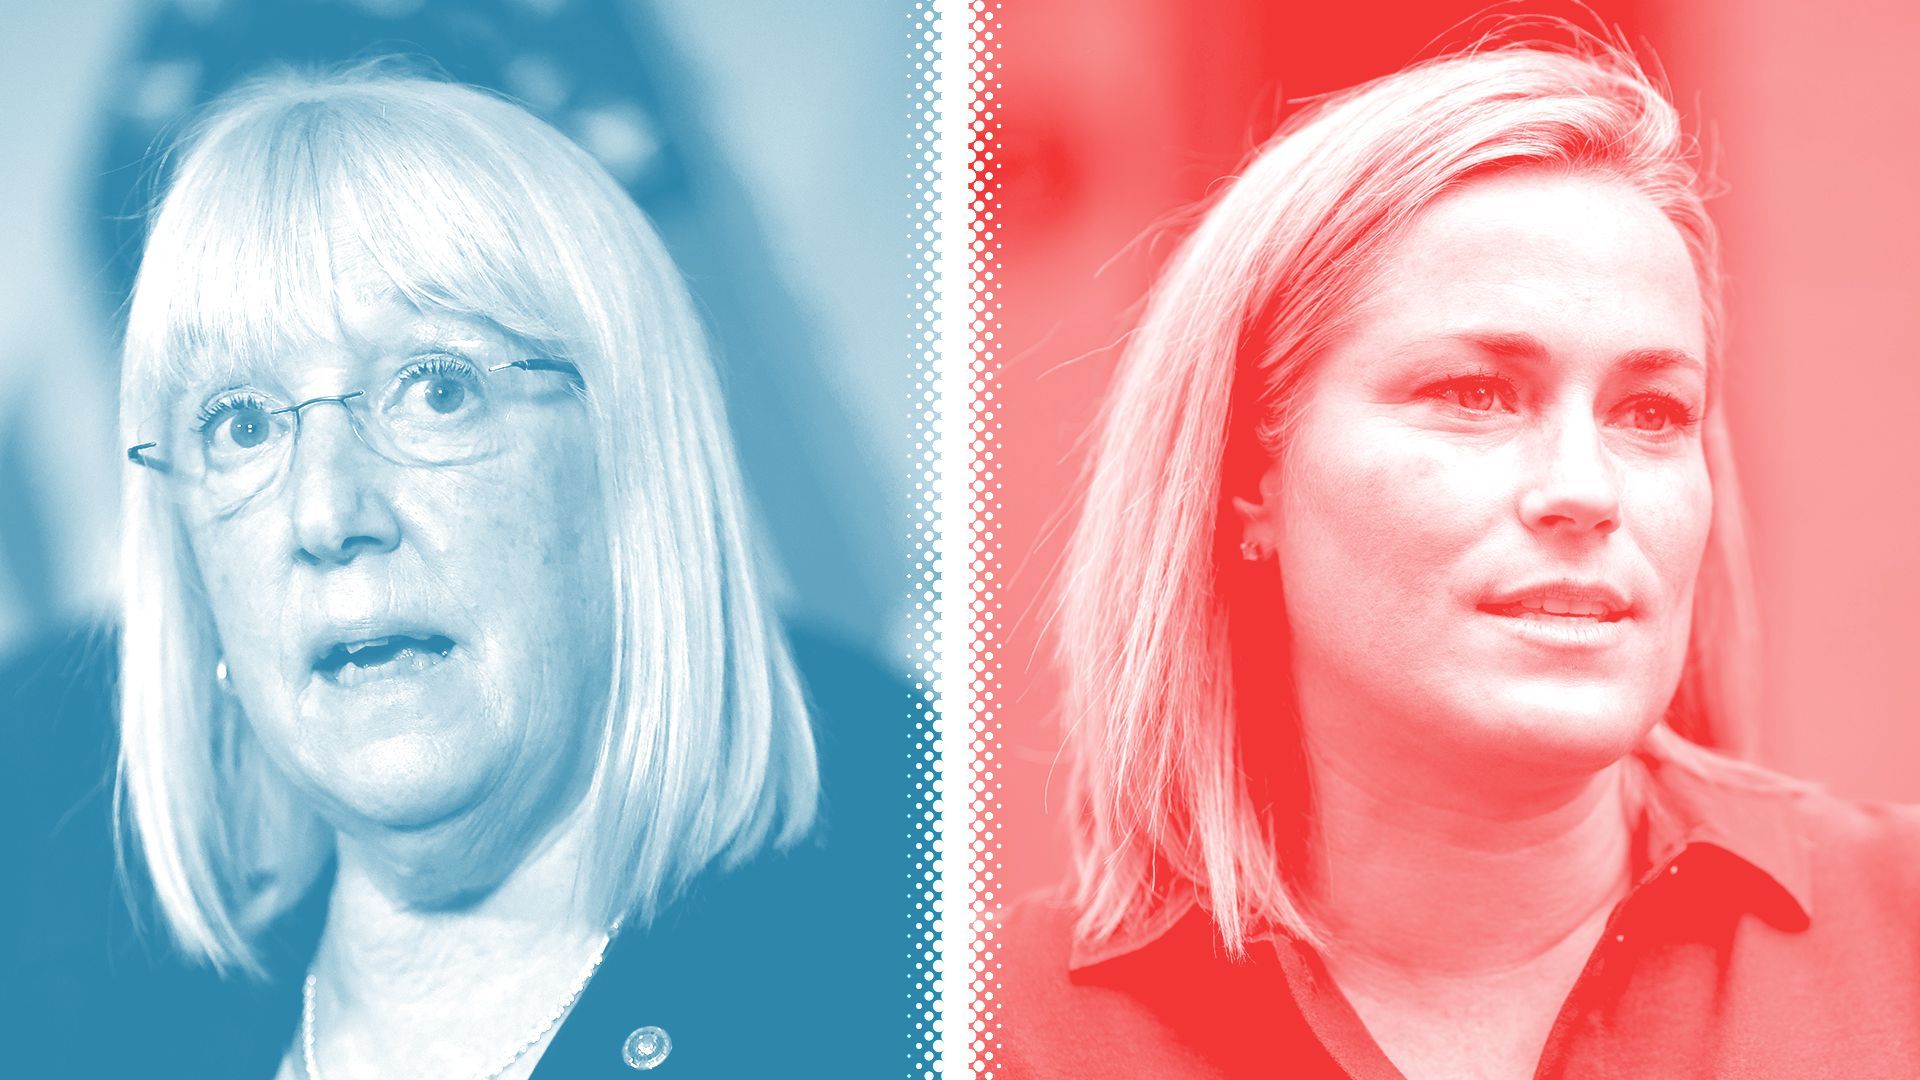 Photo illustration of Patty Murray, tinted blue, and Tiffany Smiley, tinted red, separated by a white halftone divider.